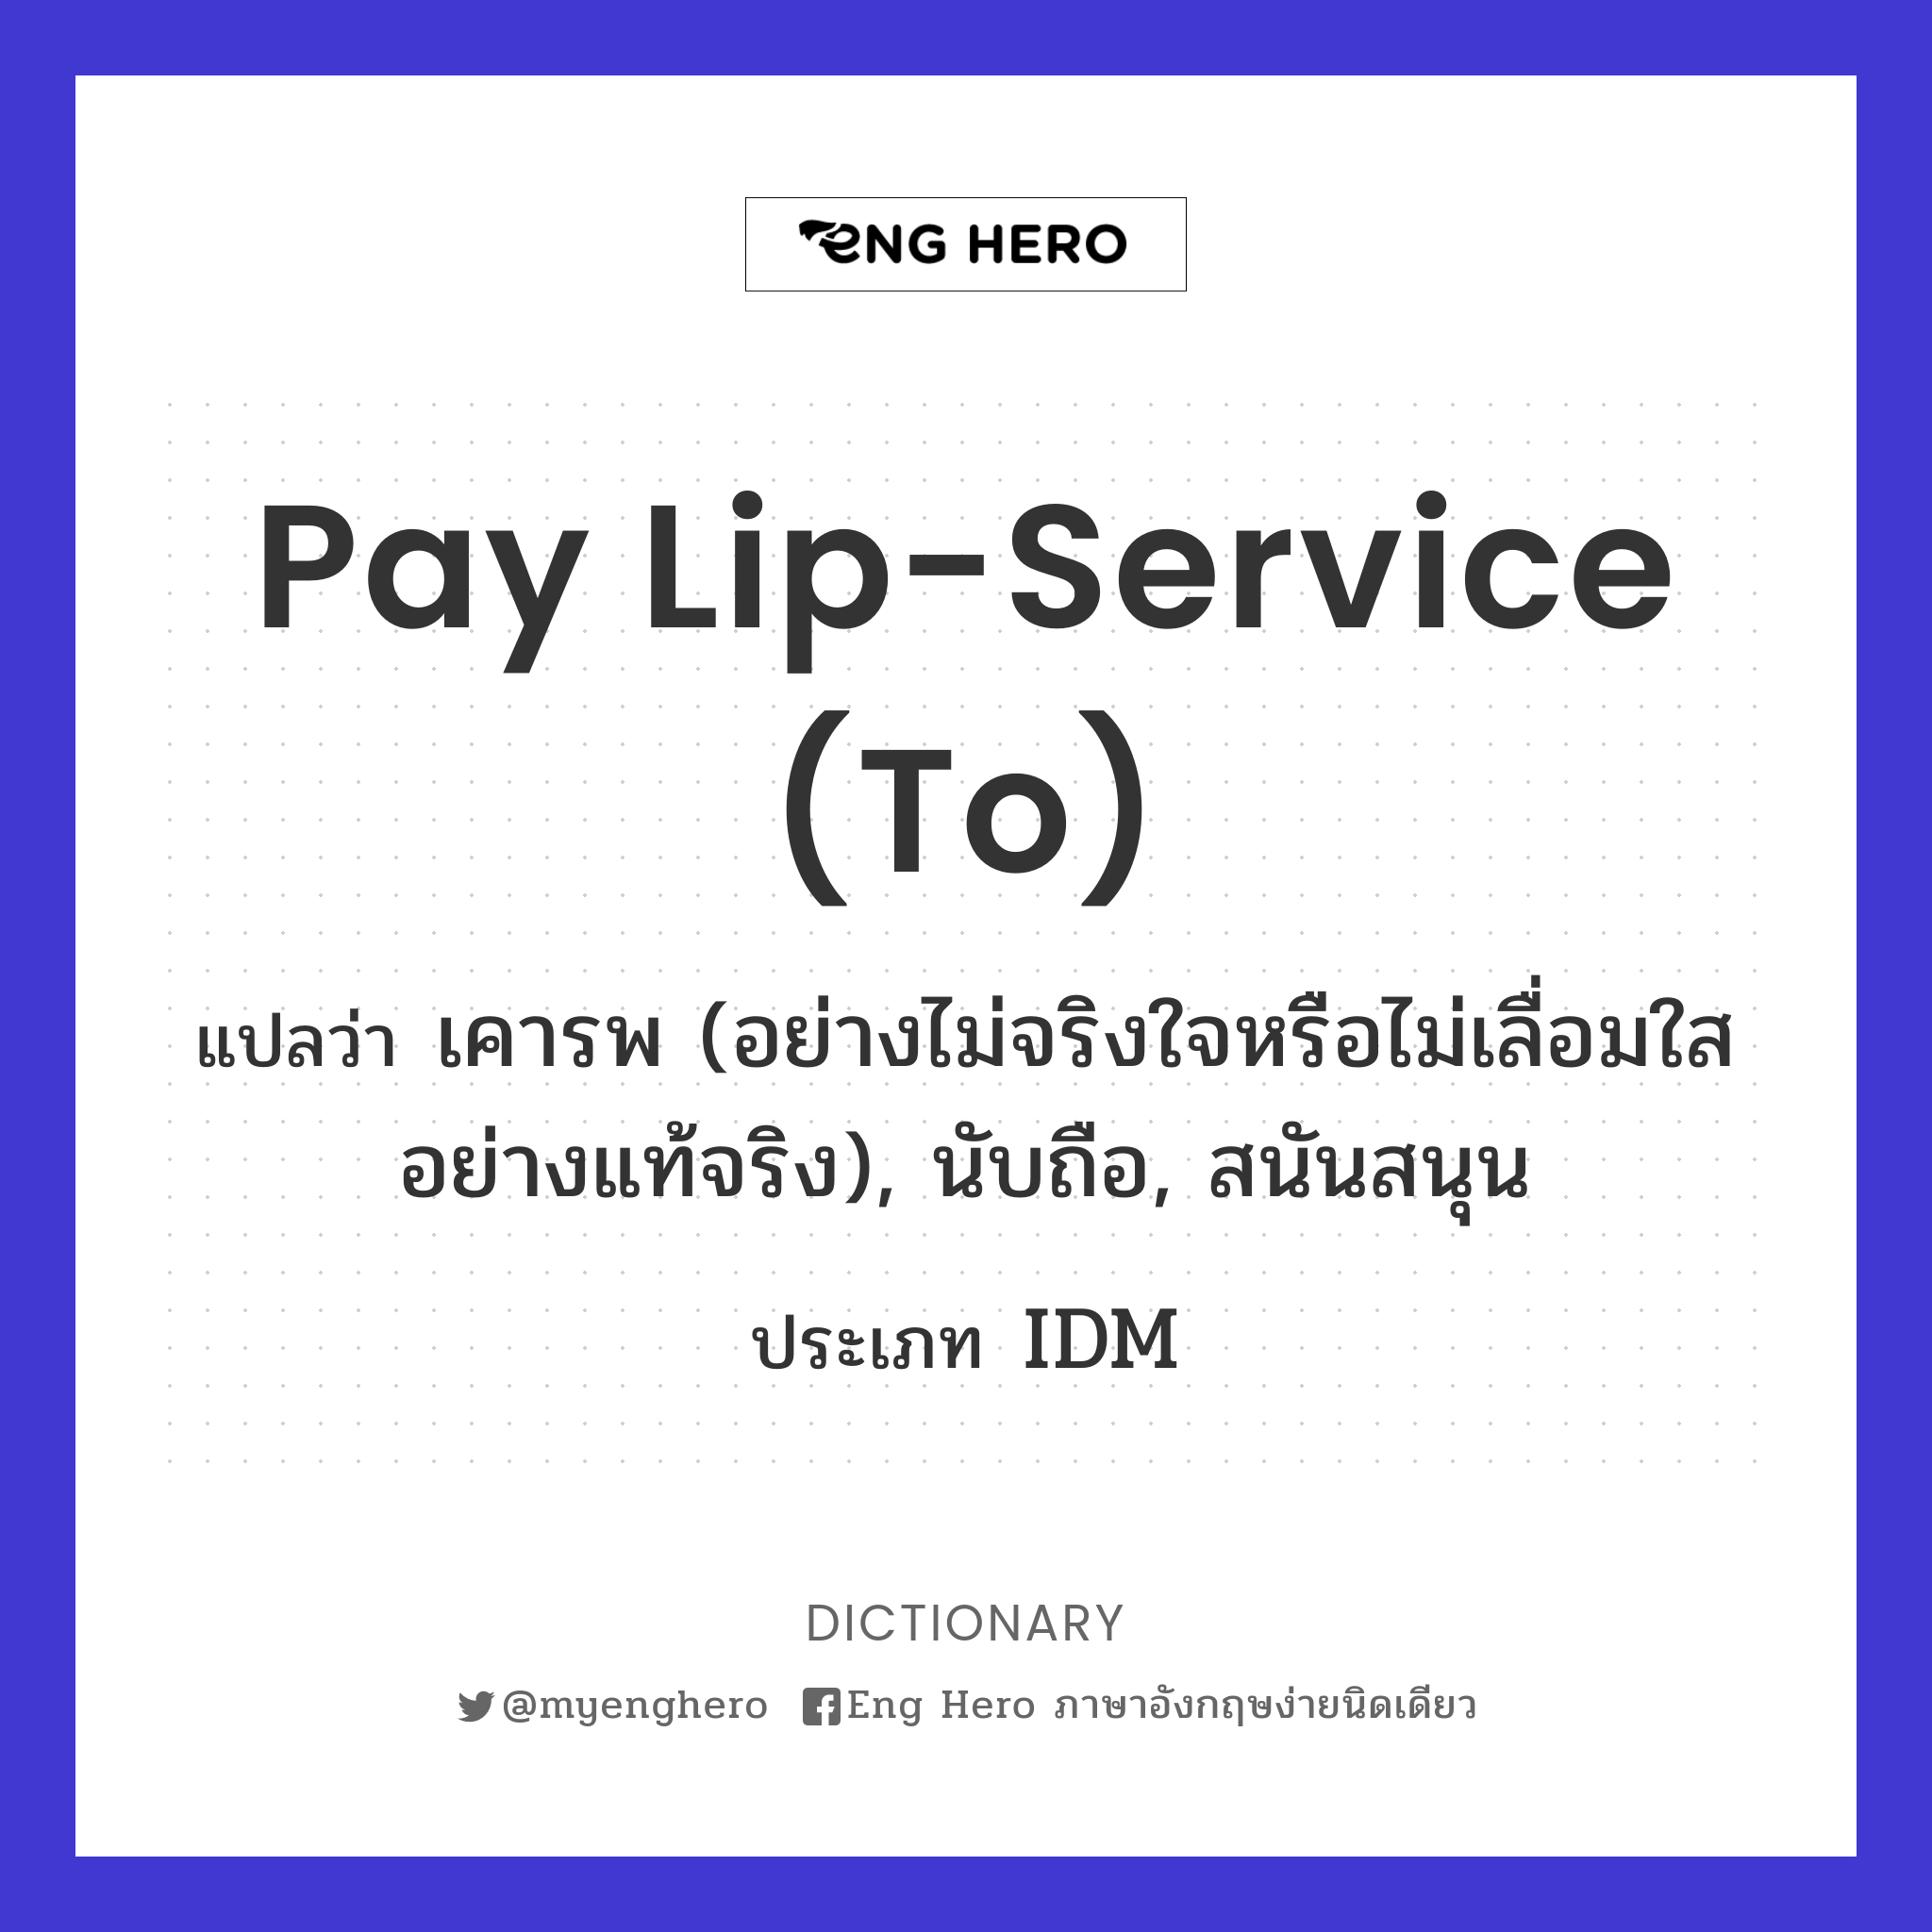 pay lip-service (to)